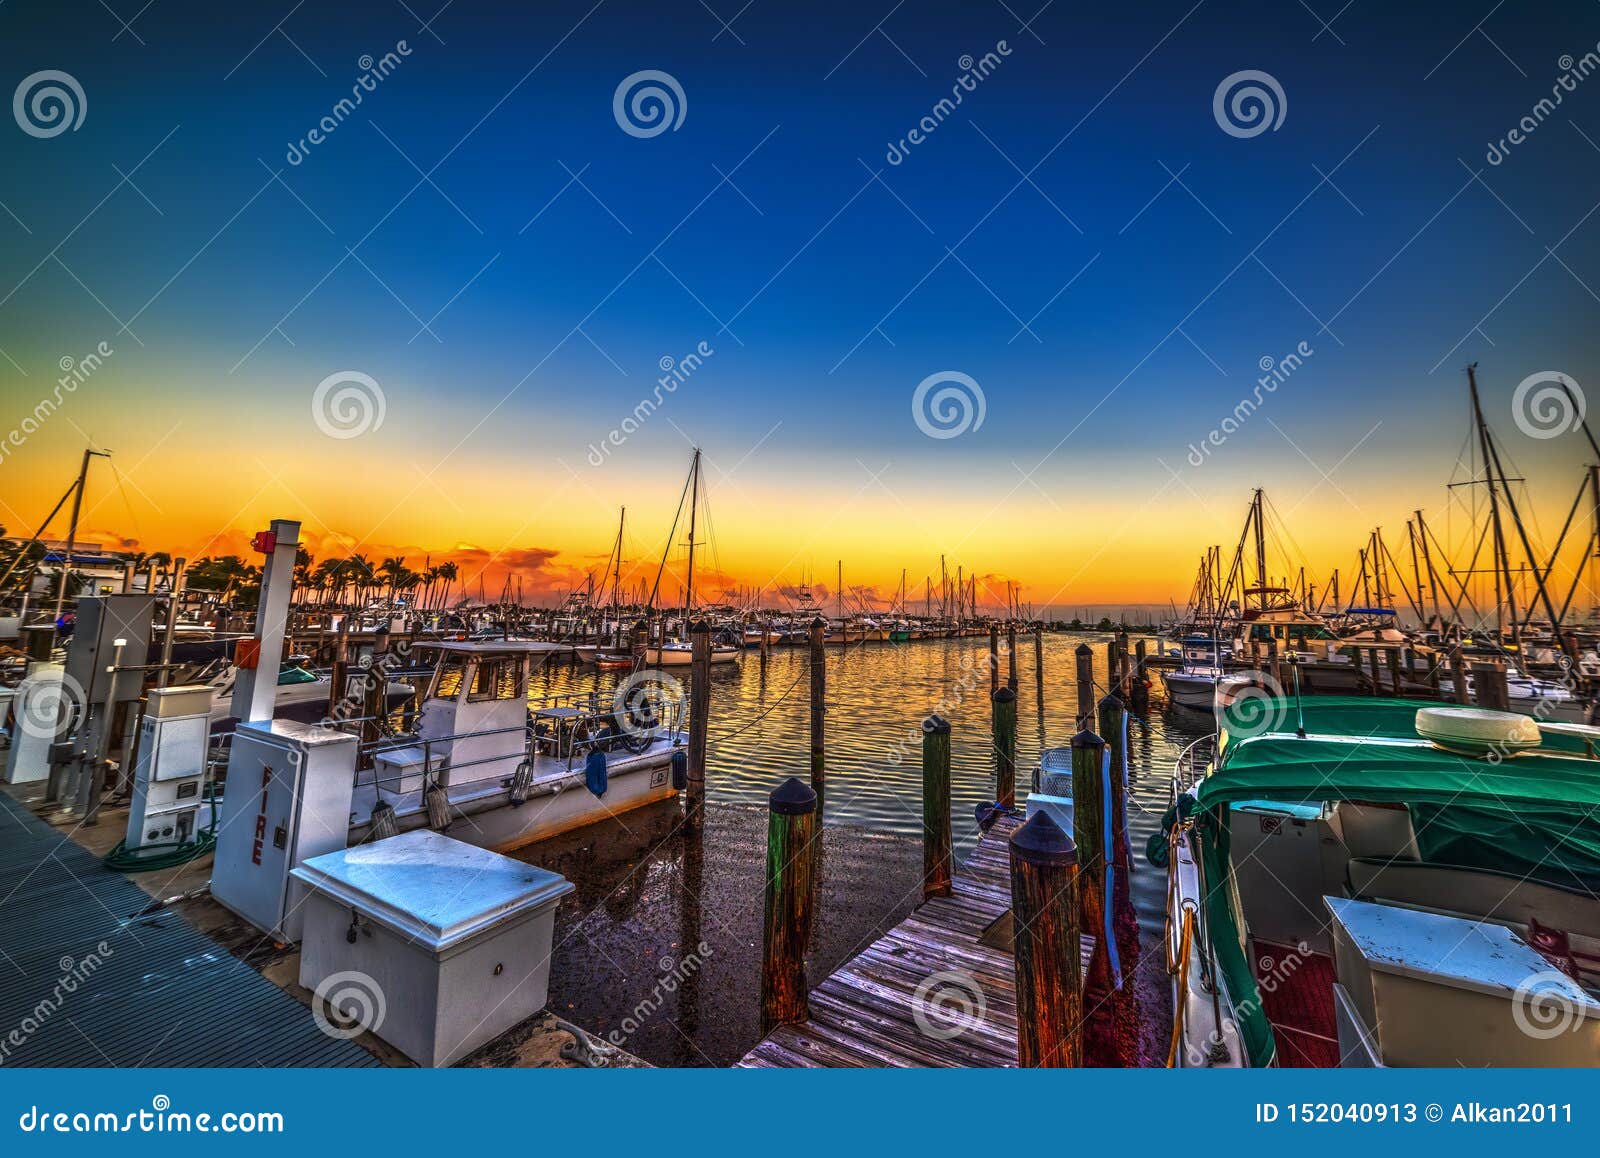 boats in coconut grove harbor at sunset